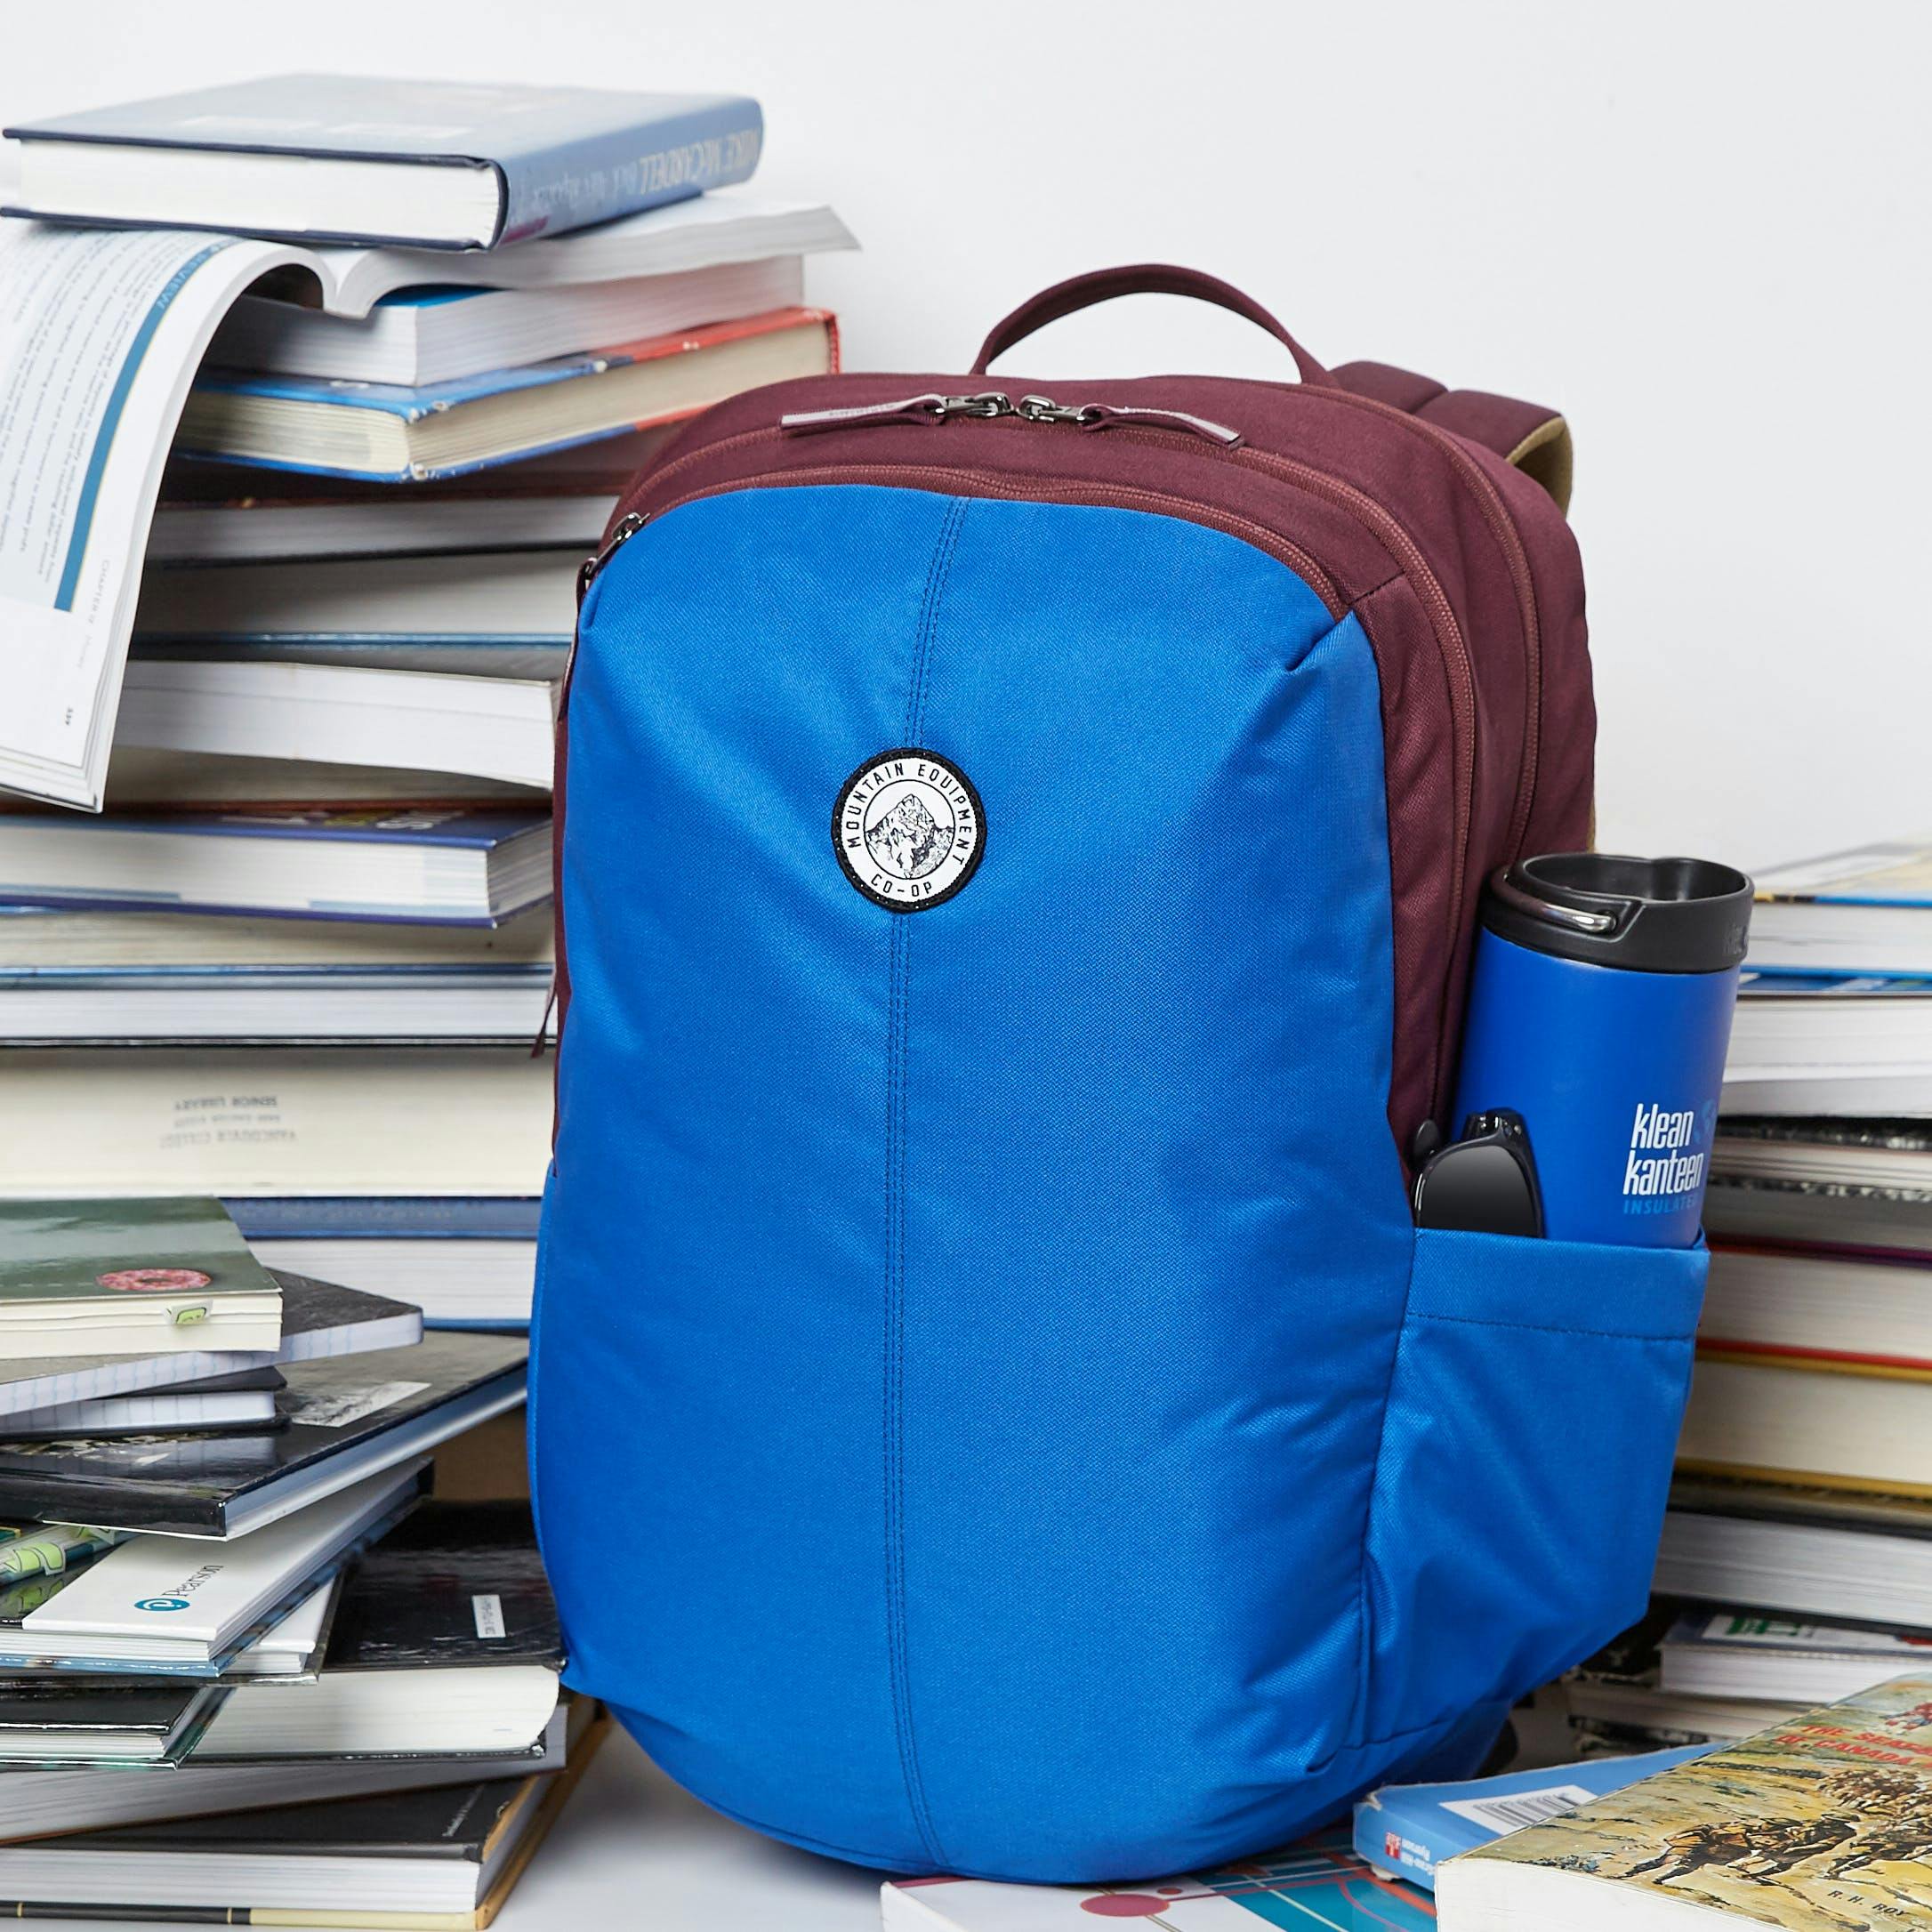 Blue MEC backpack with a blue Kleen Kanteen waterbottle, surrounded by stacks of textbooks